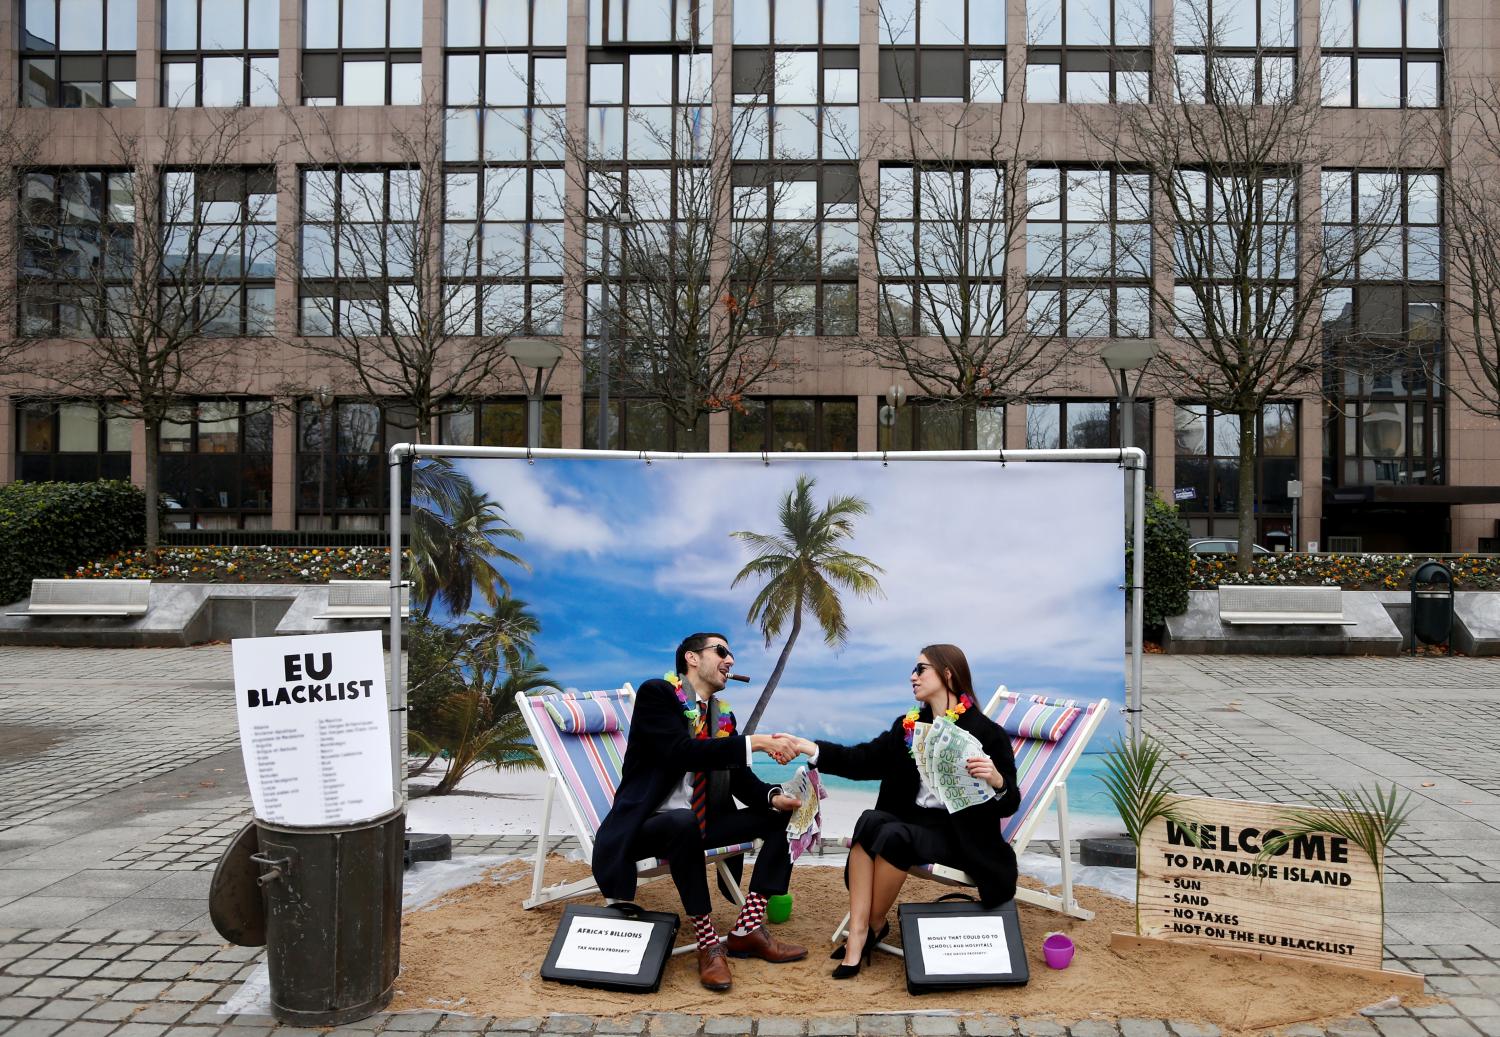 Activists stage a protest on a mock tropical island beach representing a tax haven outside a meeting of European Union finance ministers in Brussels, Belgium, December 5, 2017.  REUTERS/Francois Lenoir